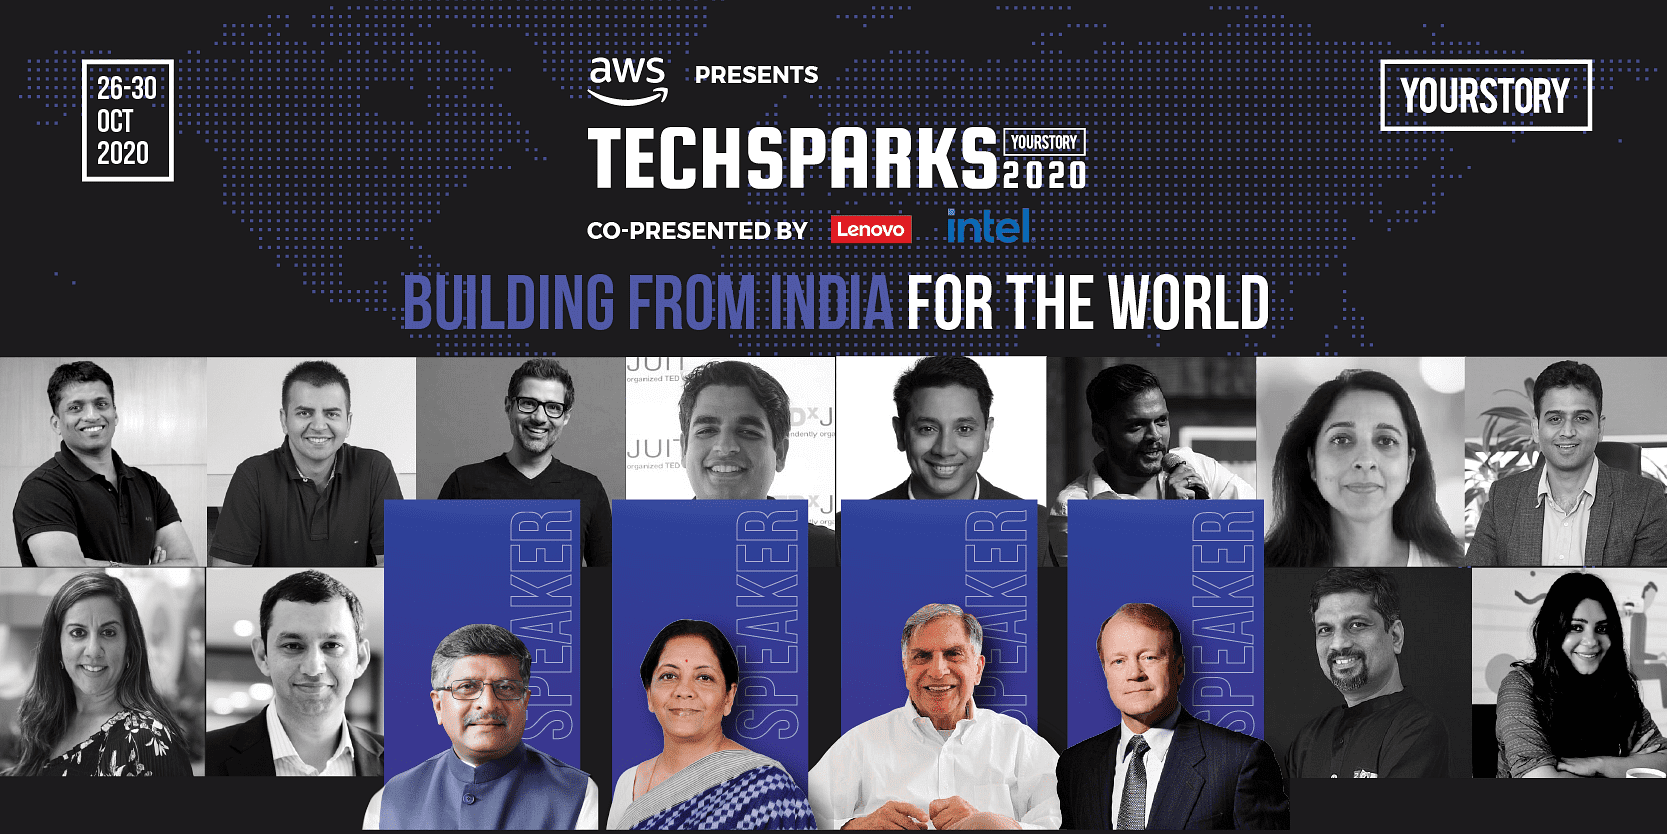 [TechSparks 2020] Startups can create millions of jobs, say key voices

